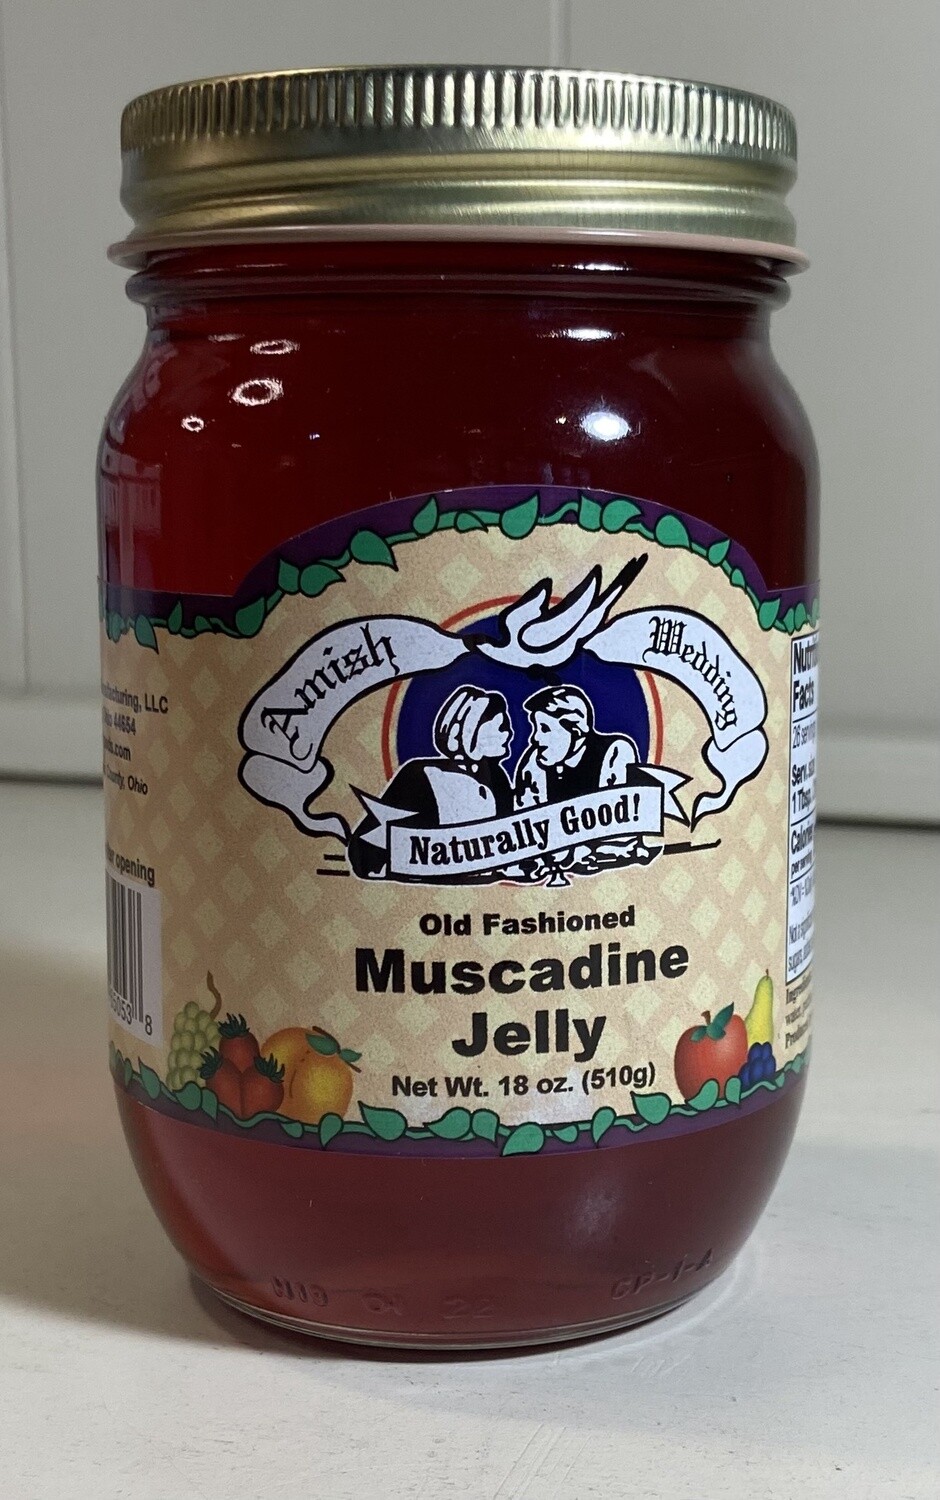 Old Fashioned Muscadine Jelly